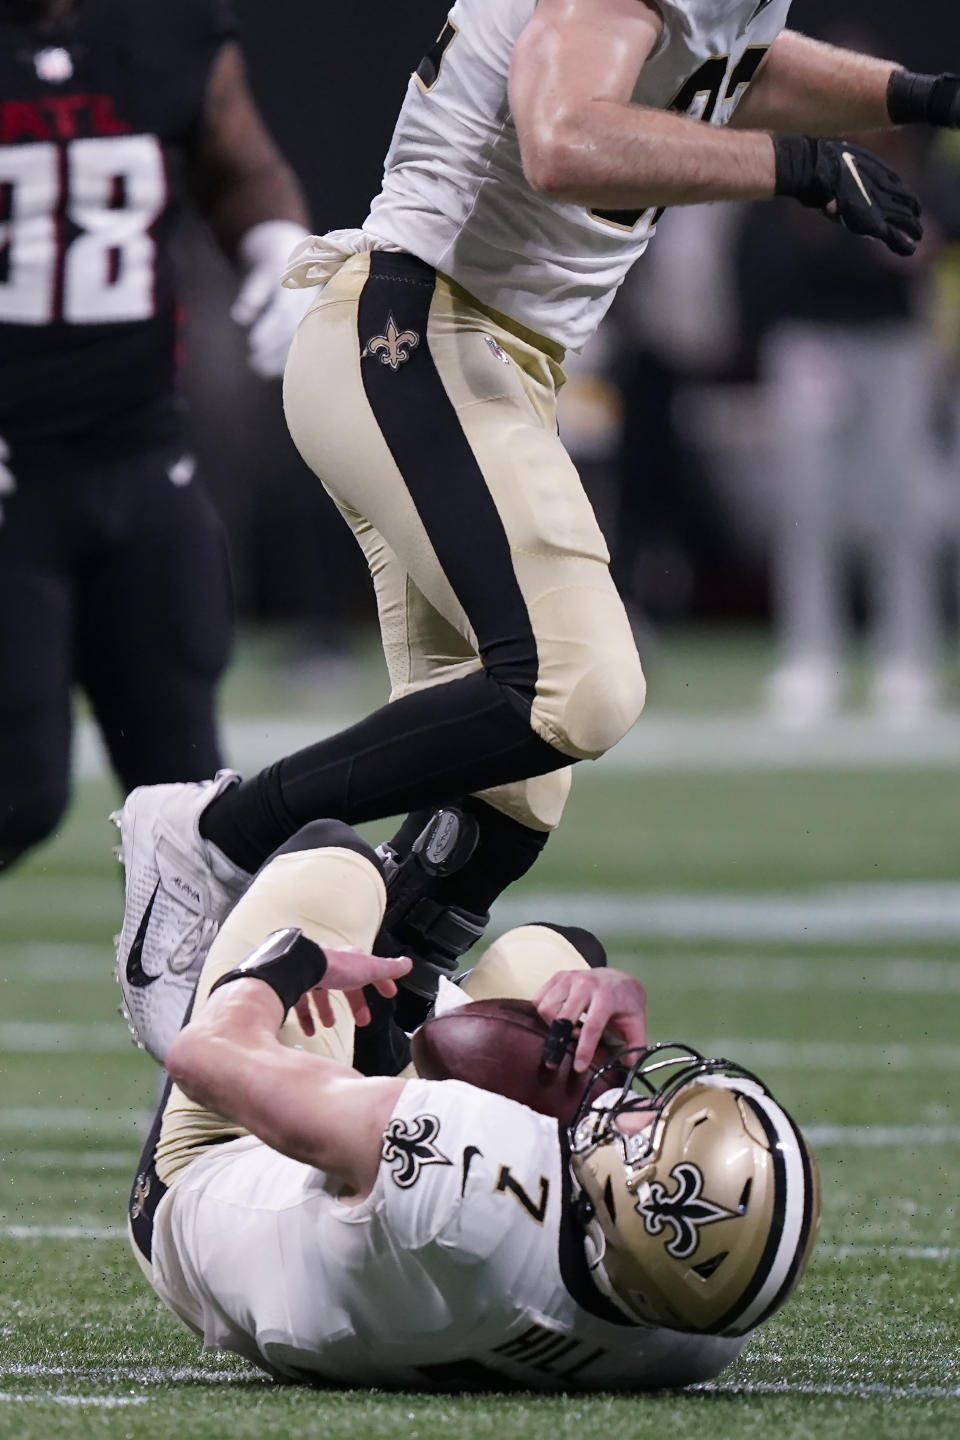 New Orleans Saints quarterback Taysom Hill (7) lies injured after a play against the Atlanta Falcons during the first half of an NFL football game, Sunday, Jan. 9, 2022, in Atlanta. Hill left the game due to injury. (AP Photo/Brynn Anderson)